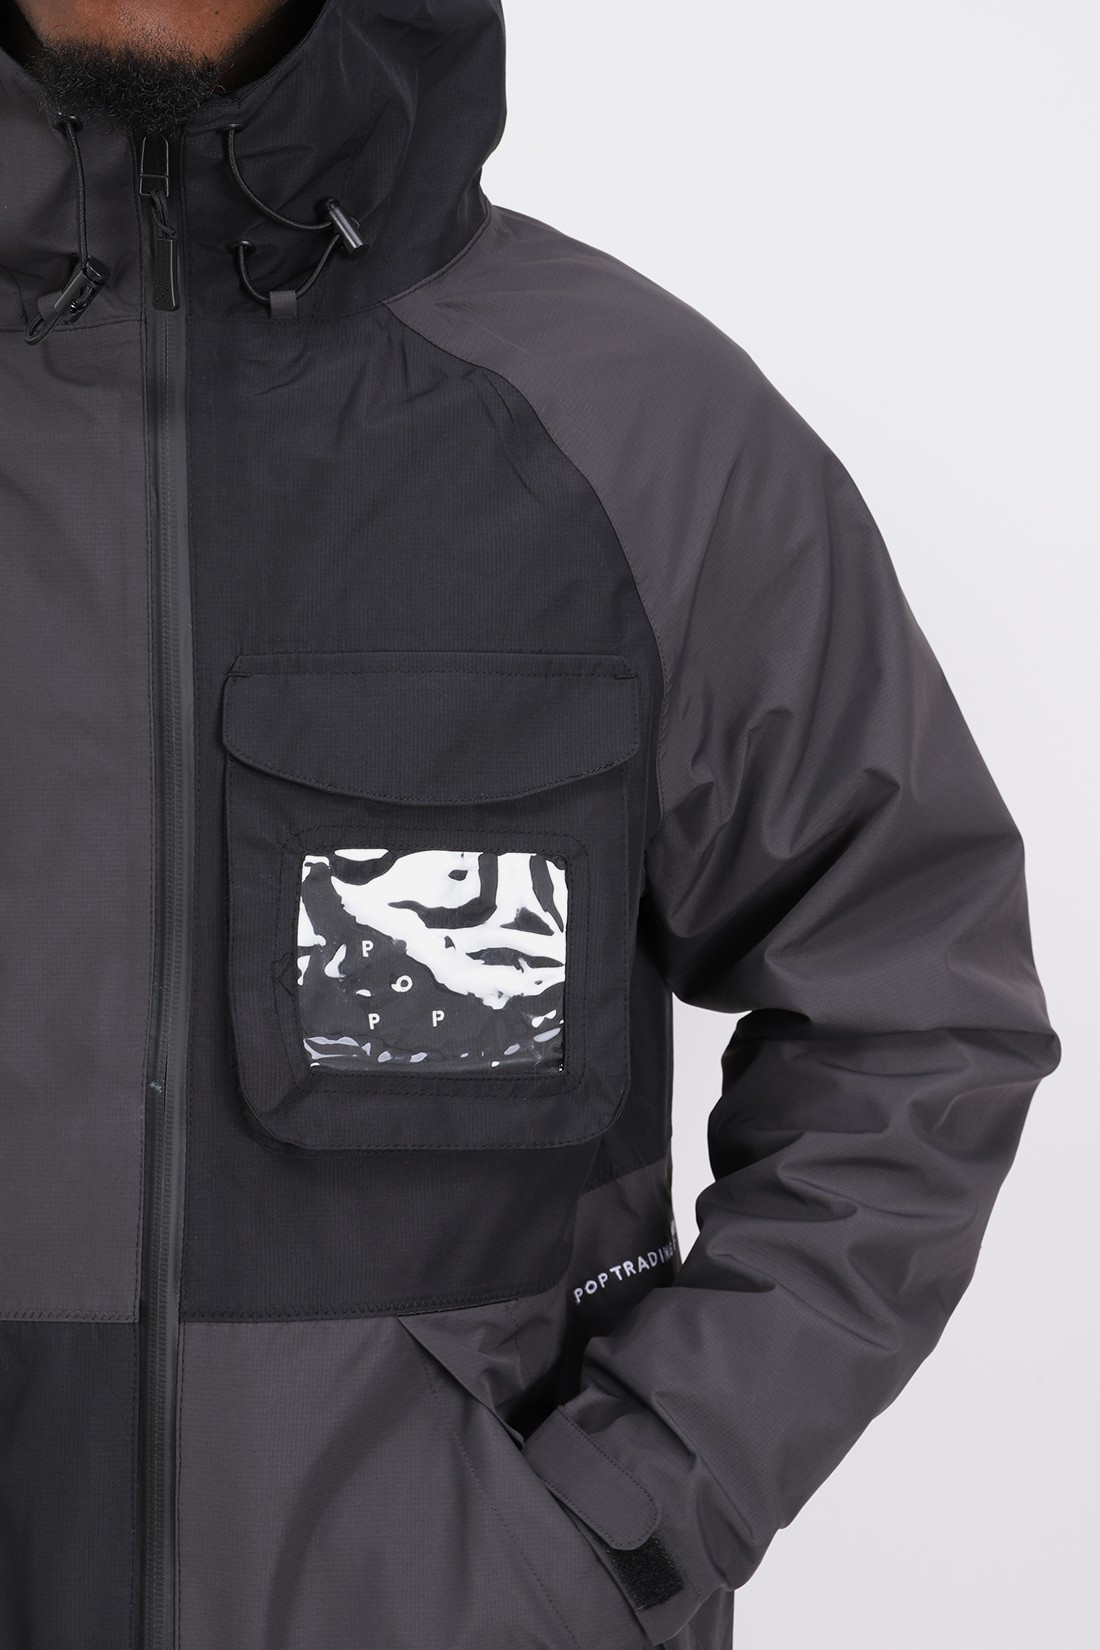 POP TRADING COMPANY / Pop oracle jacket Black/anthracite